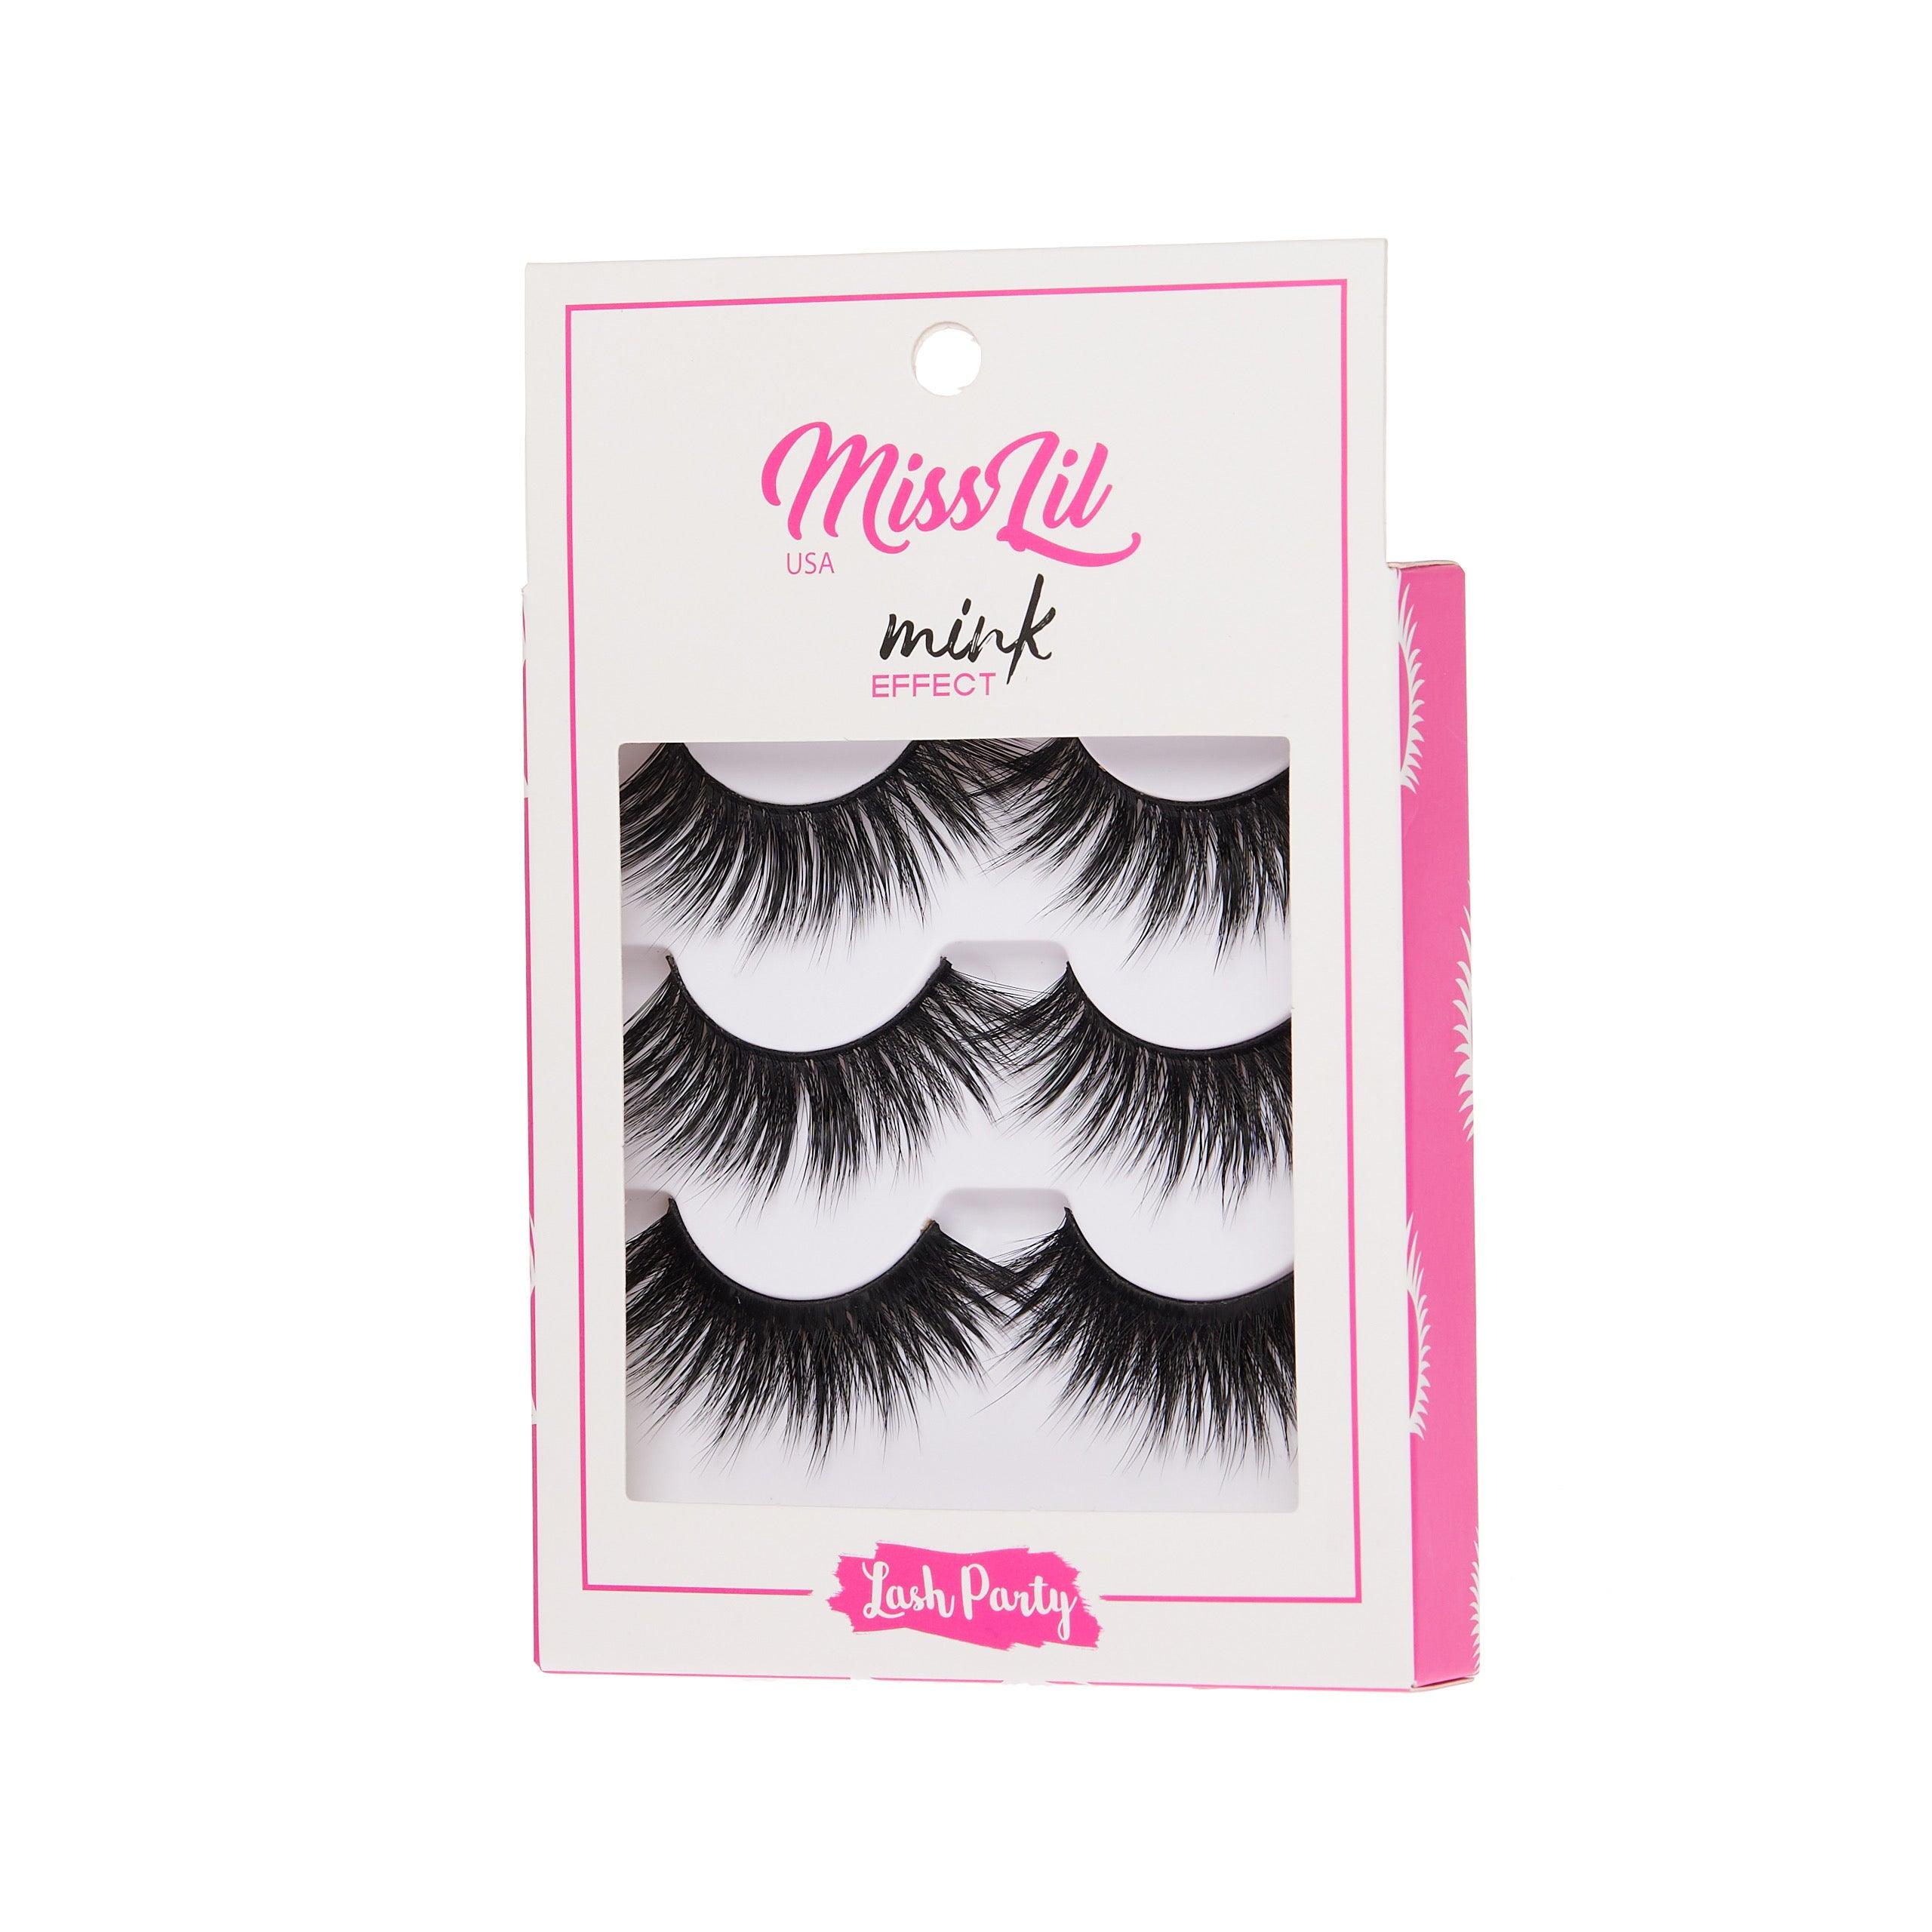 3-Pair Faux Mink Effect Eyelashes - Lash Party Collection #24 - Pack of 3 - Miss Lil USA